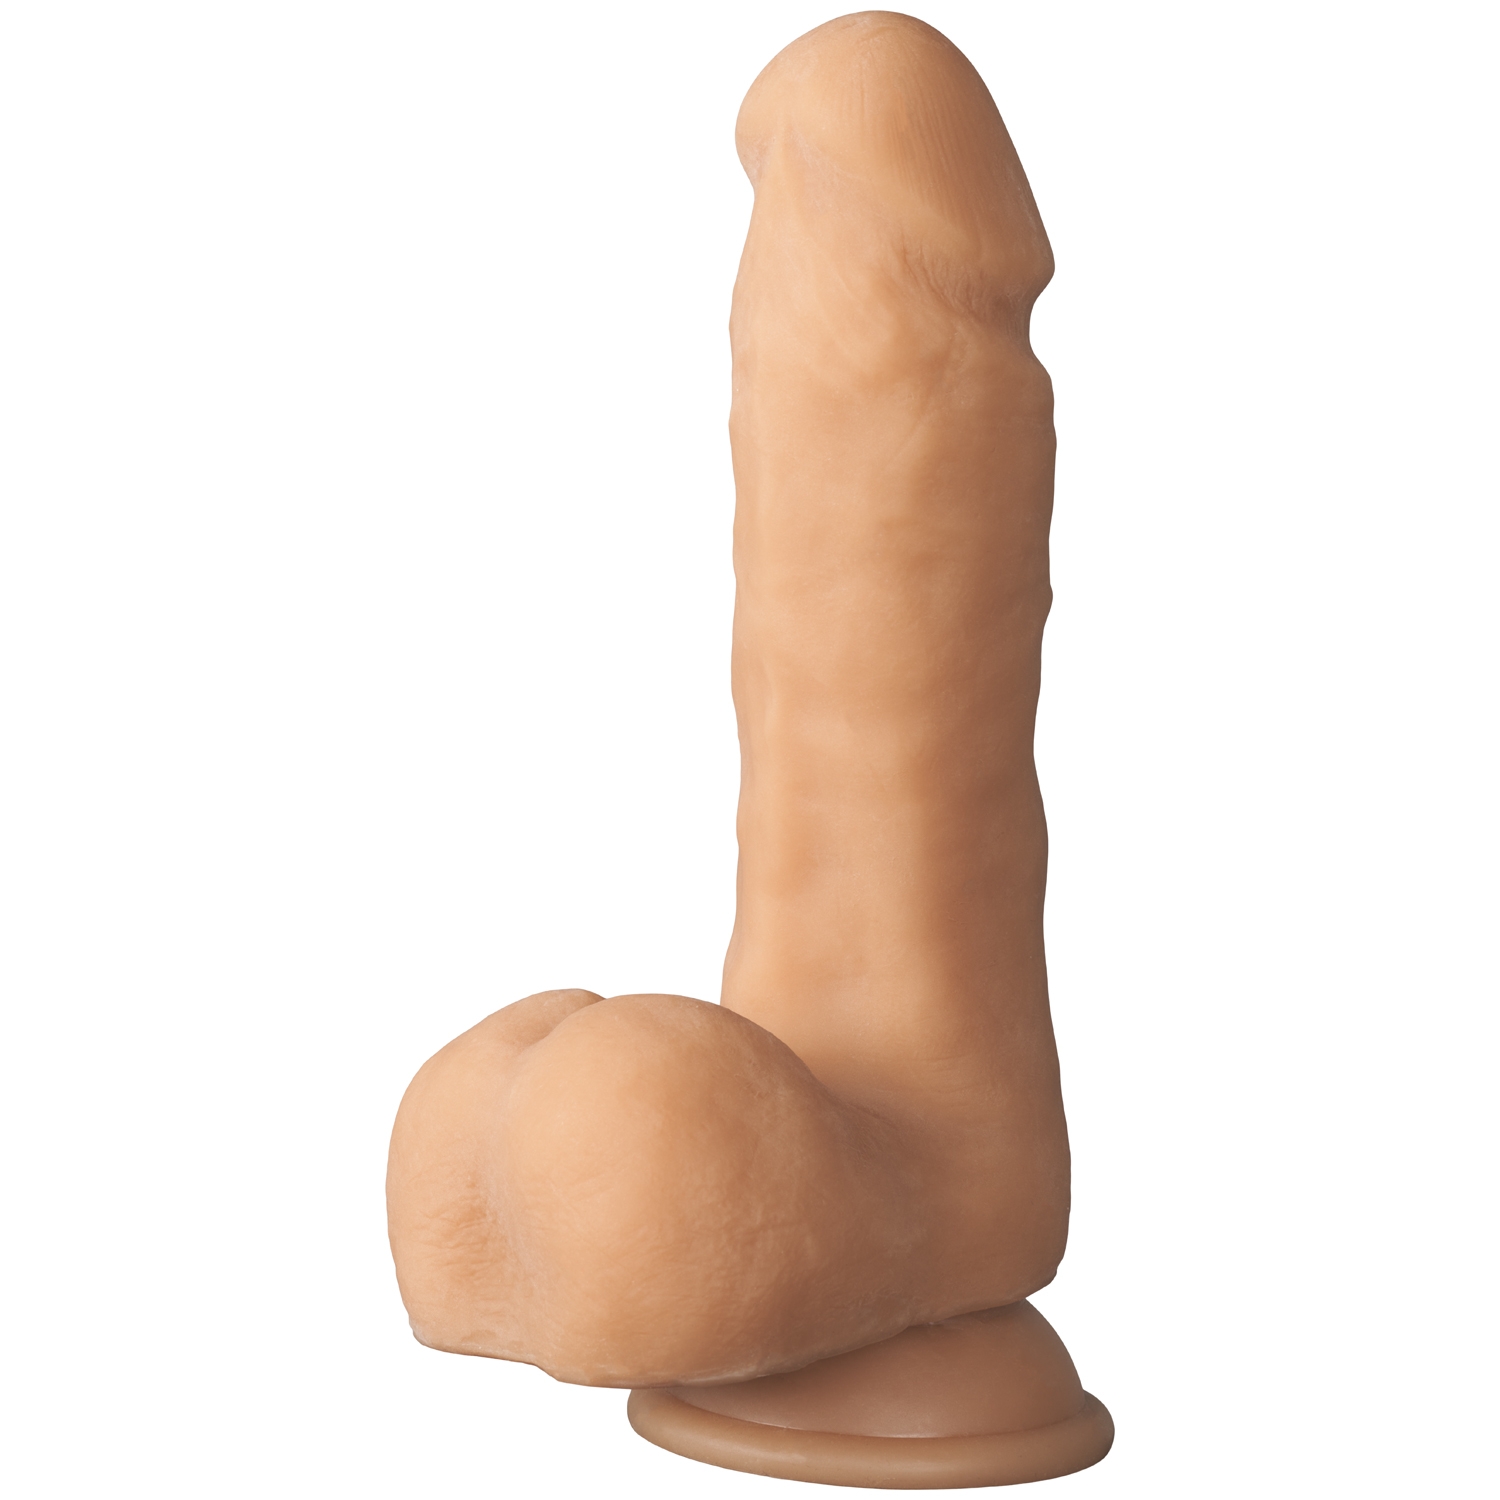 Willie City Luxe Realistisk Dildo 20 cm - Nude thumbnail